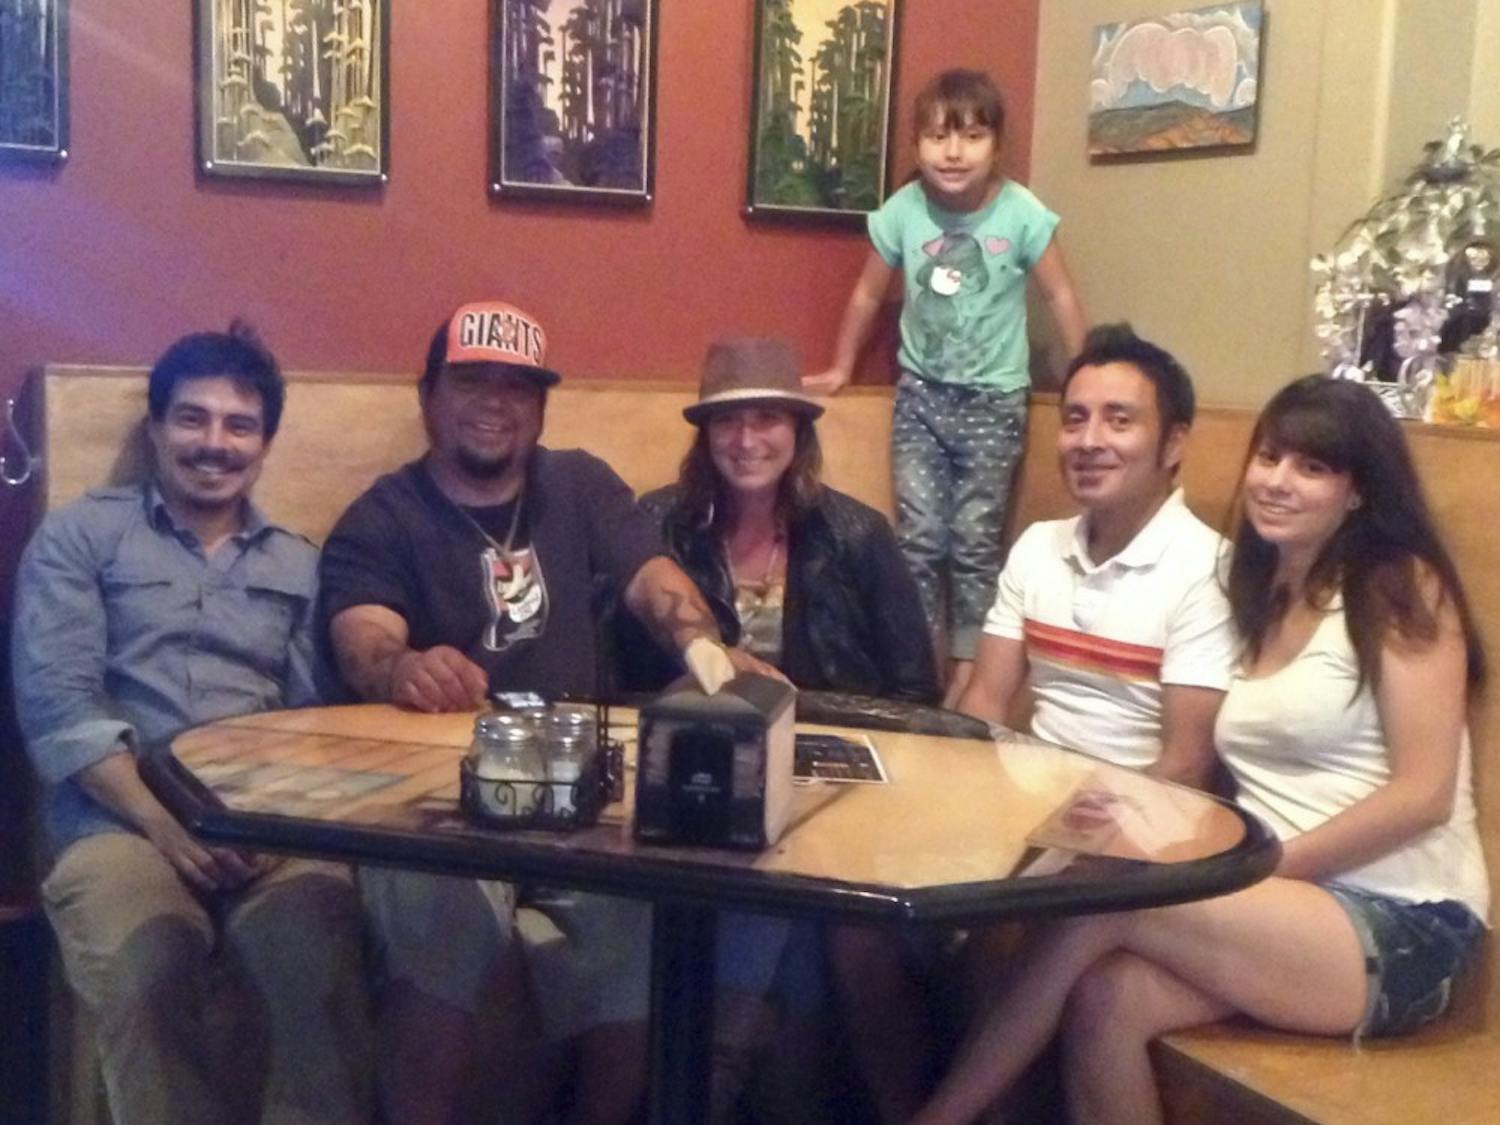 	Members of the production team for “Princess Marisol and the Moon Thieves” sit down for a meal. From left, Matias Pizarro, musical director; Christian Orellana, musical contributor; Audrey Mcnamara-Garcia, Illustrator; Marisol Paramo, voice of Princess Marisol; Alex Paramo, author of the Princess Marisol Trilogy and co-owner of Community Publishing; Yvette Sandoval, editor of the Princess Marisol Trilogy and co-owner of Community Publishing.